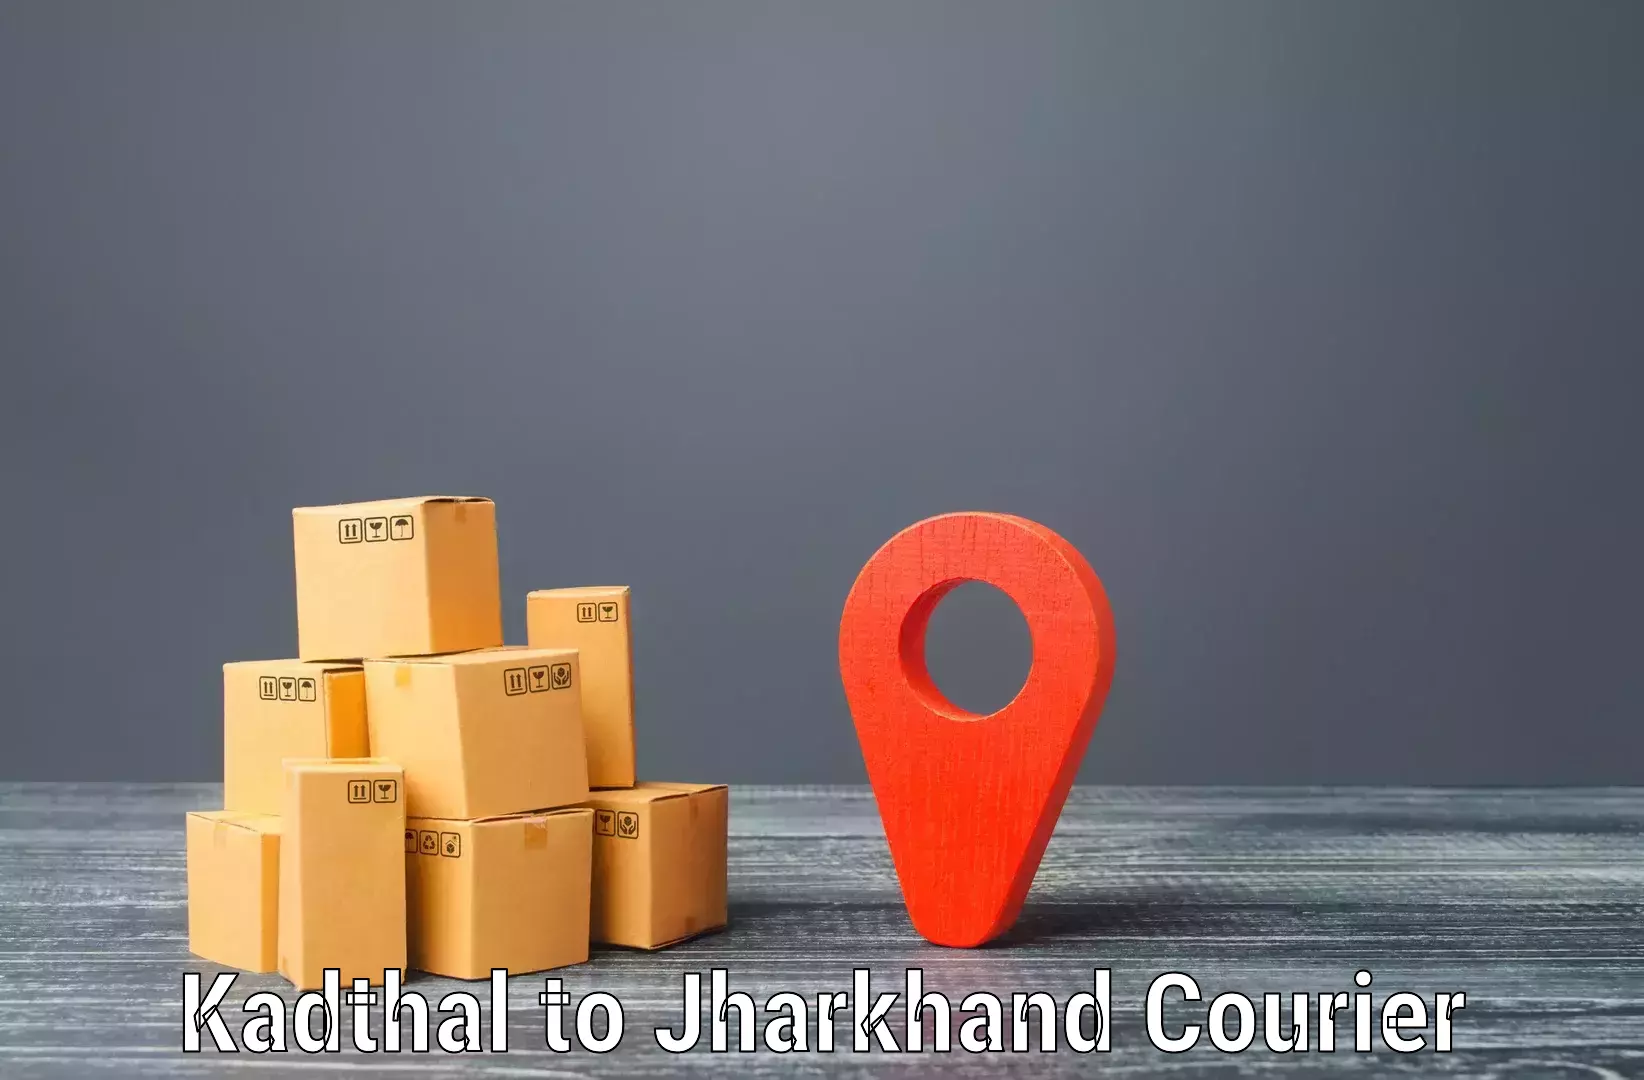 Same day shipping in Kadthal to Jamshedpur